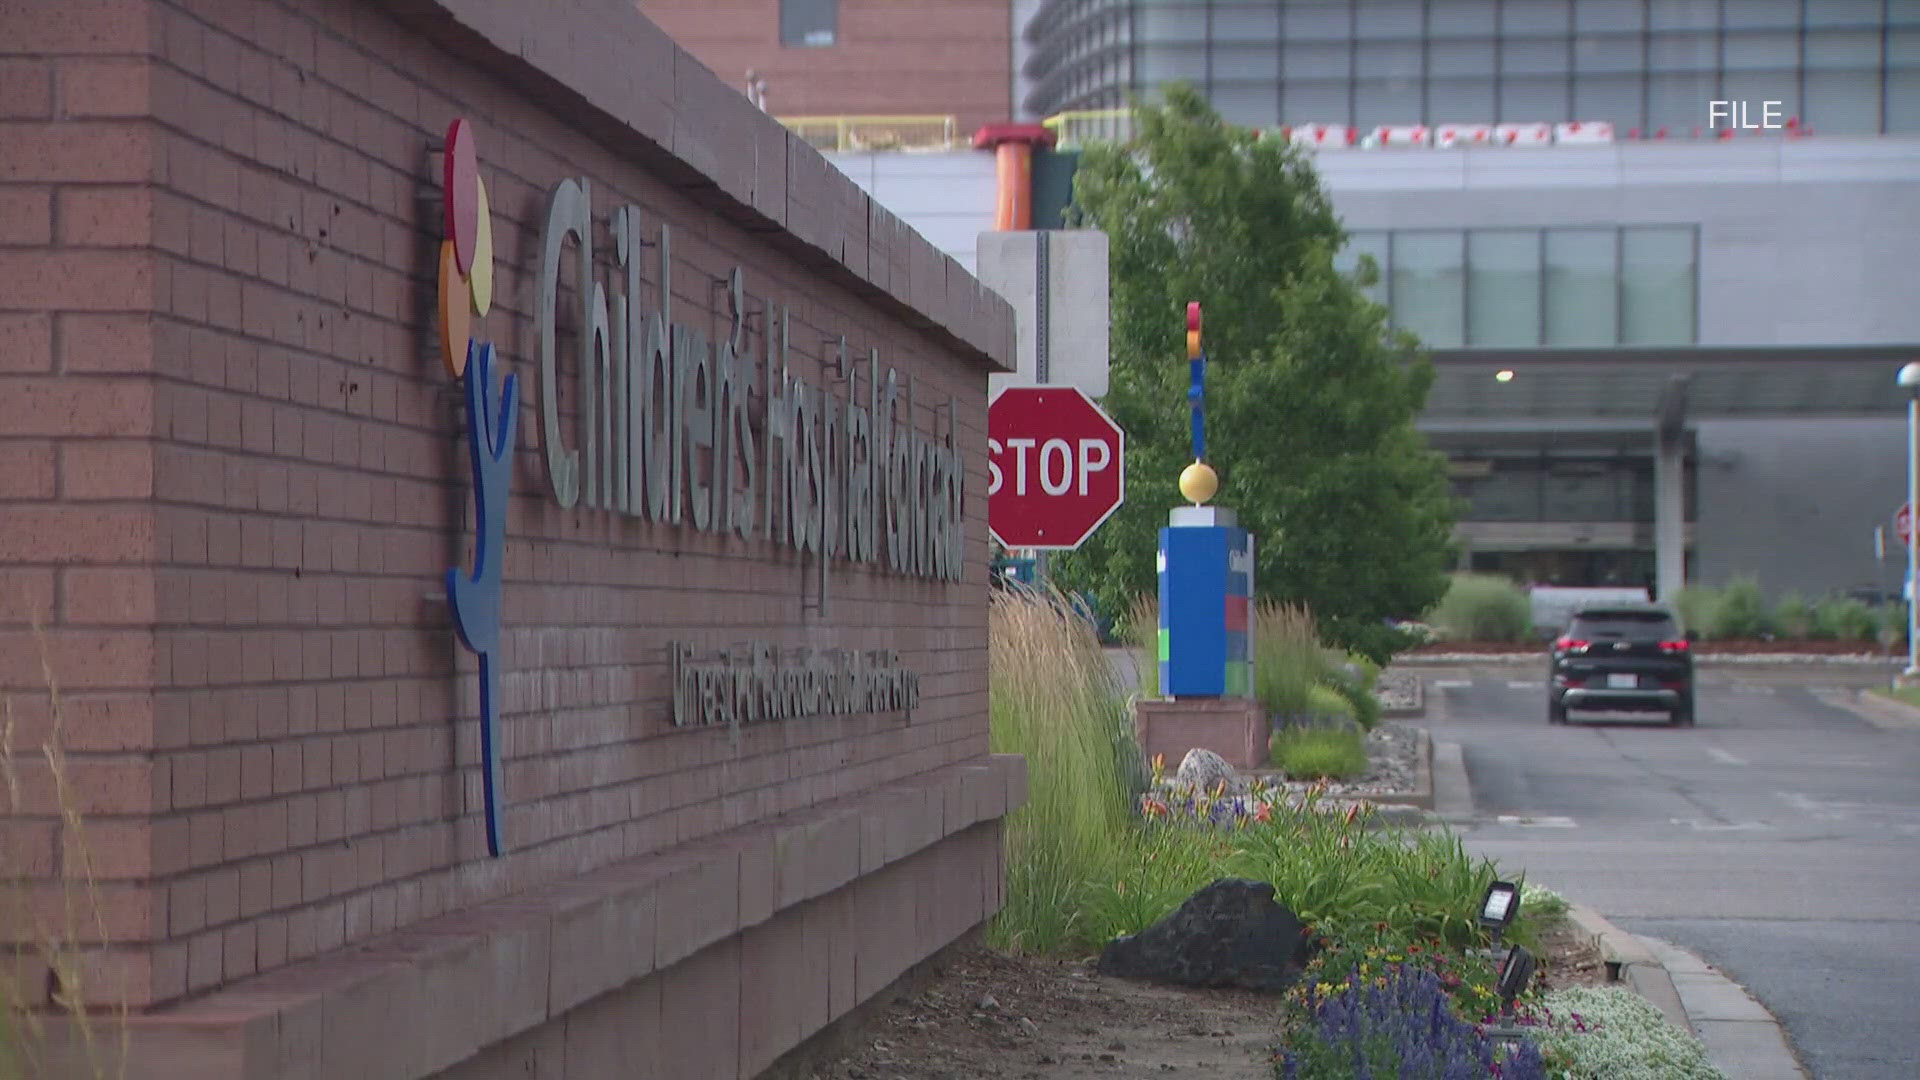 The plaintiff in the case claims the hospital violated Colorado's Anti-Discrimination Act.